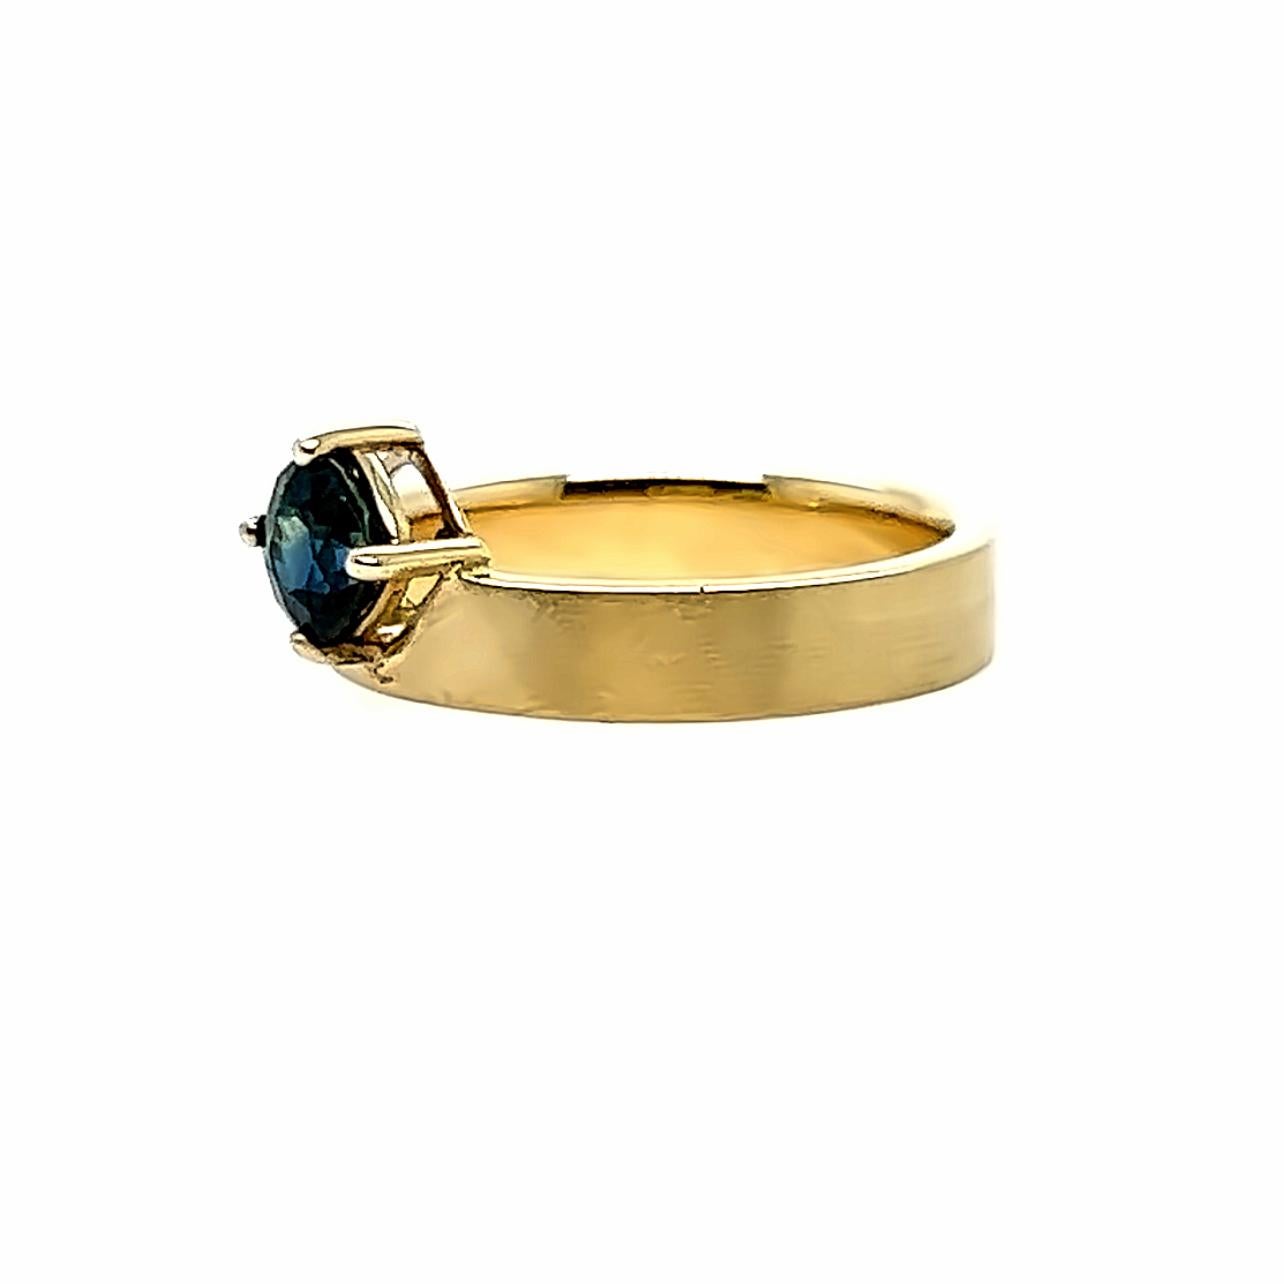 14k solid recycled yellow gold
Blue green natural sapphire, AKA Teal, cushion cut, 5.0-5.0x4.00mm, 0.80ct, Diego Mine, Madagascar. Unheated. 
Flat band, Satin Finish, 4.0mm wide Comfort Fit. 
Size 6.5 and sizable. 

Customization always welcome.